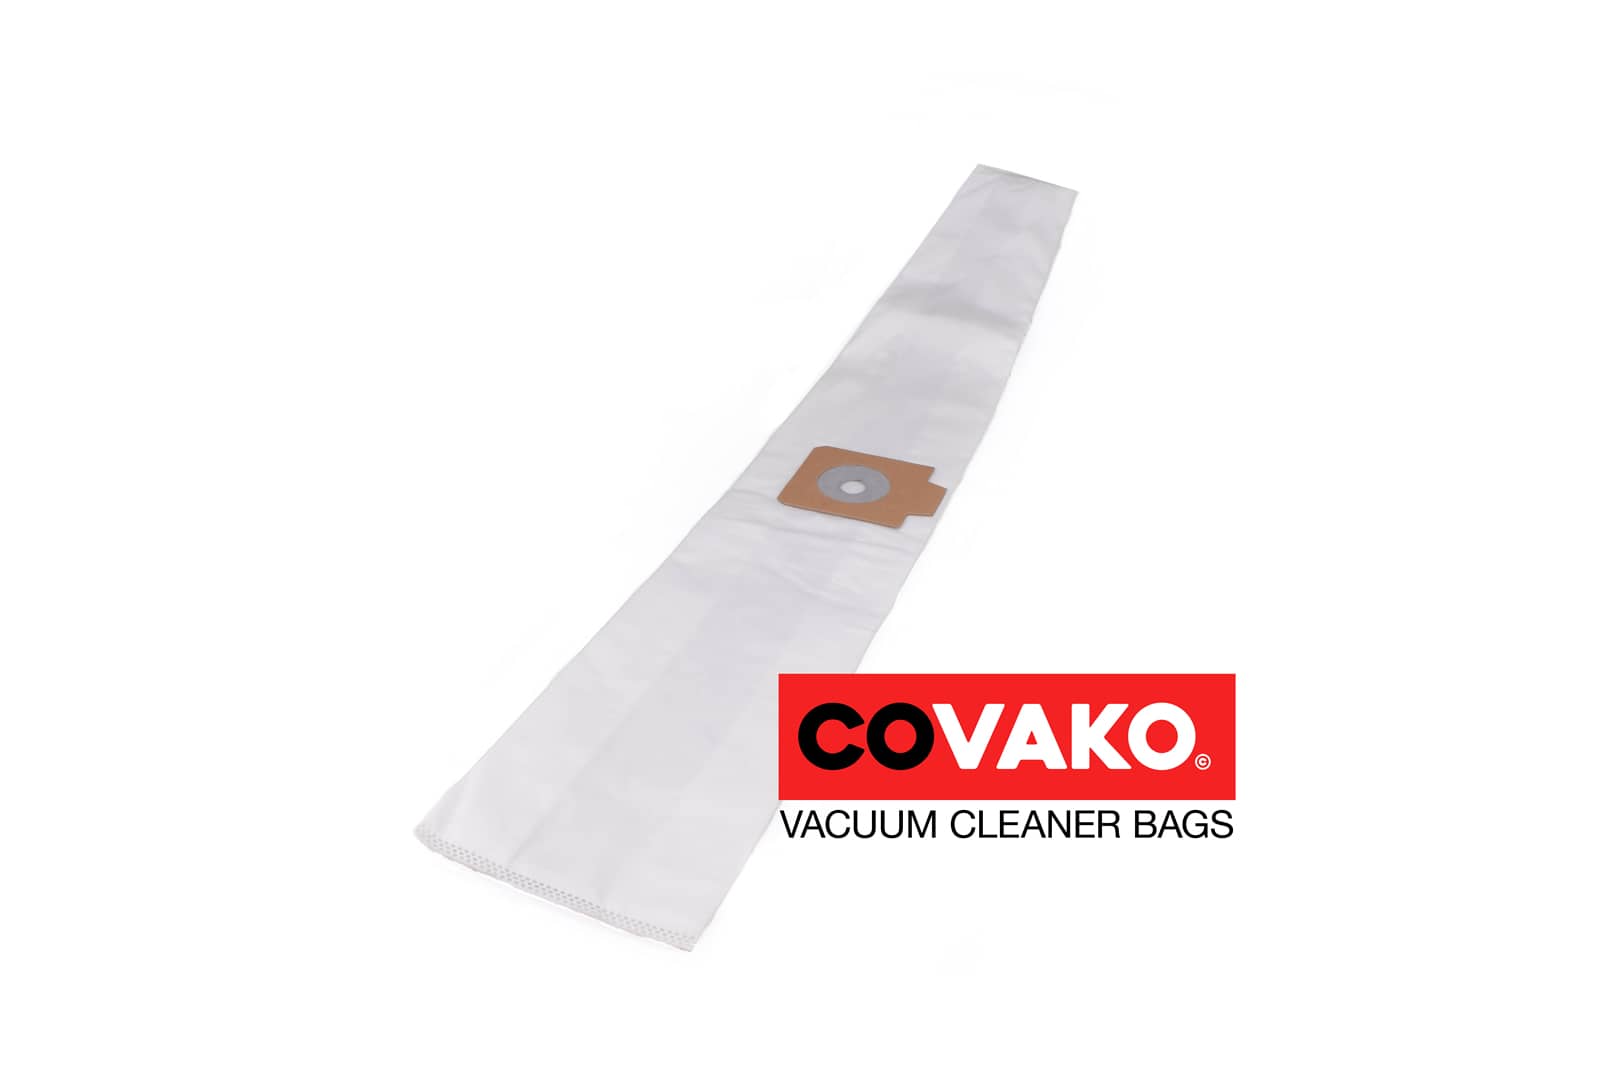 Fast GS 20 / Synthesis - Fast vacuum cleaner bags